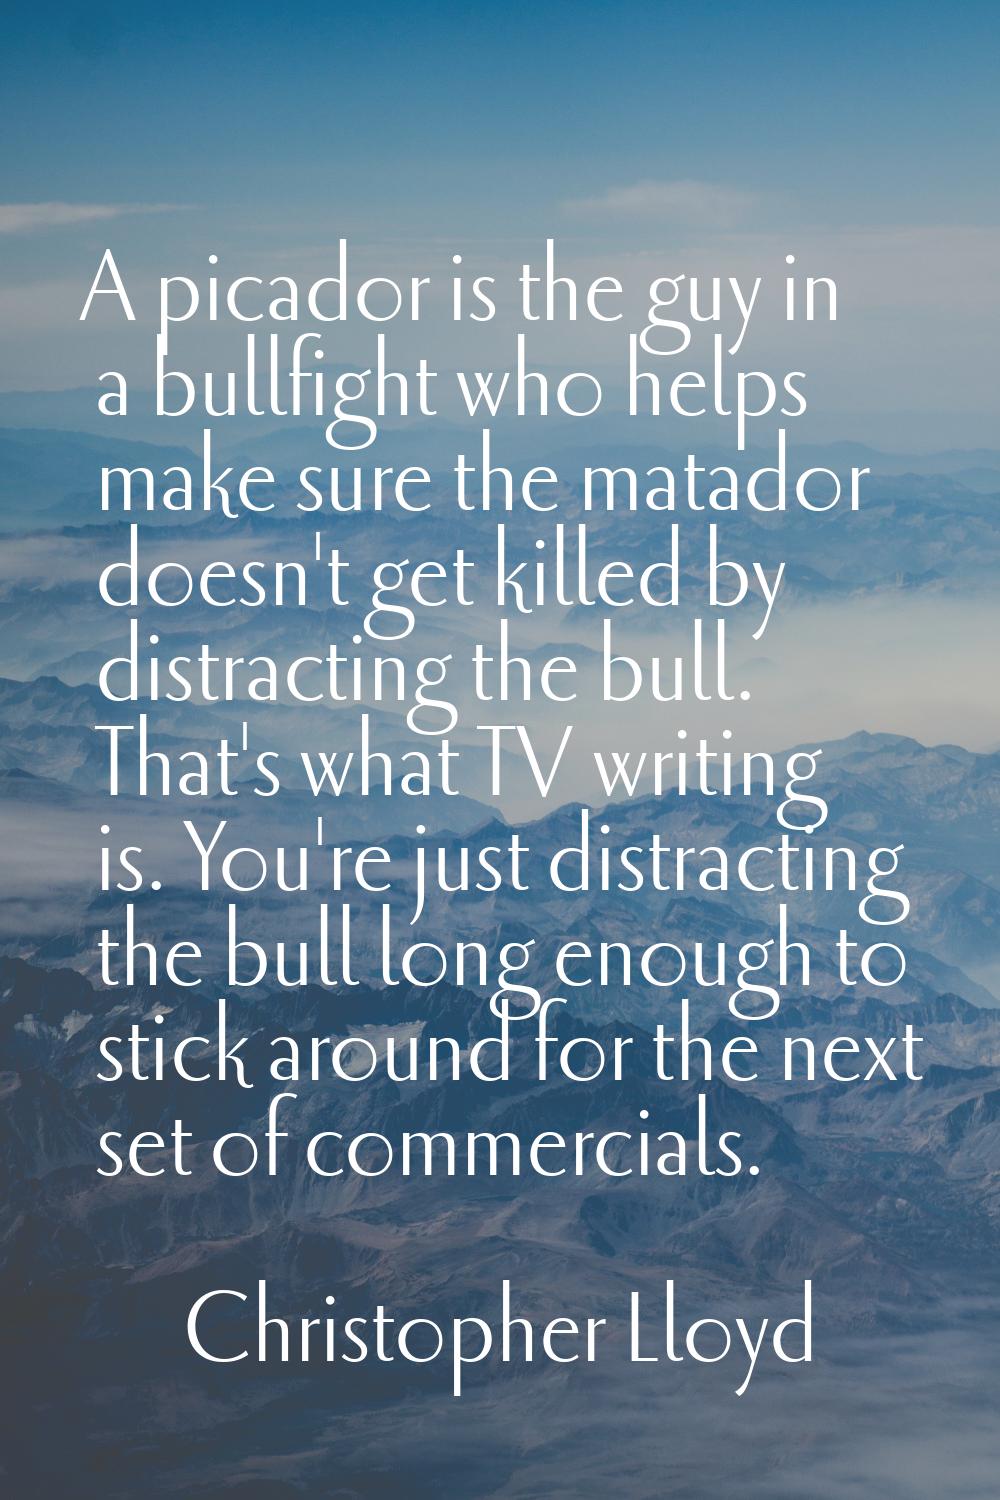 A picador is the guy in a bullfight who helps make sure the matador doesn't get killed by distracti